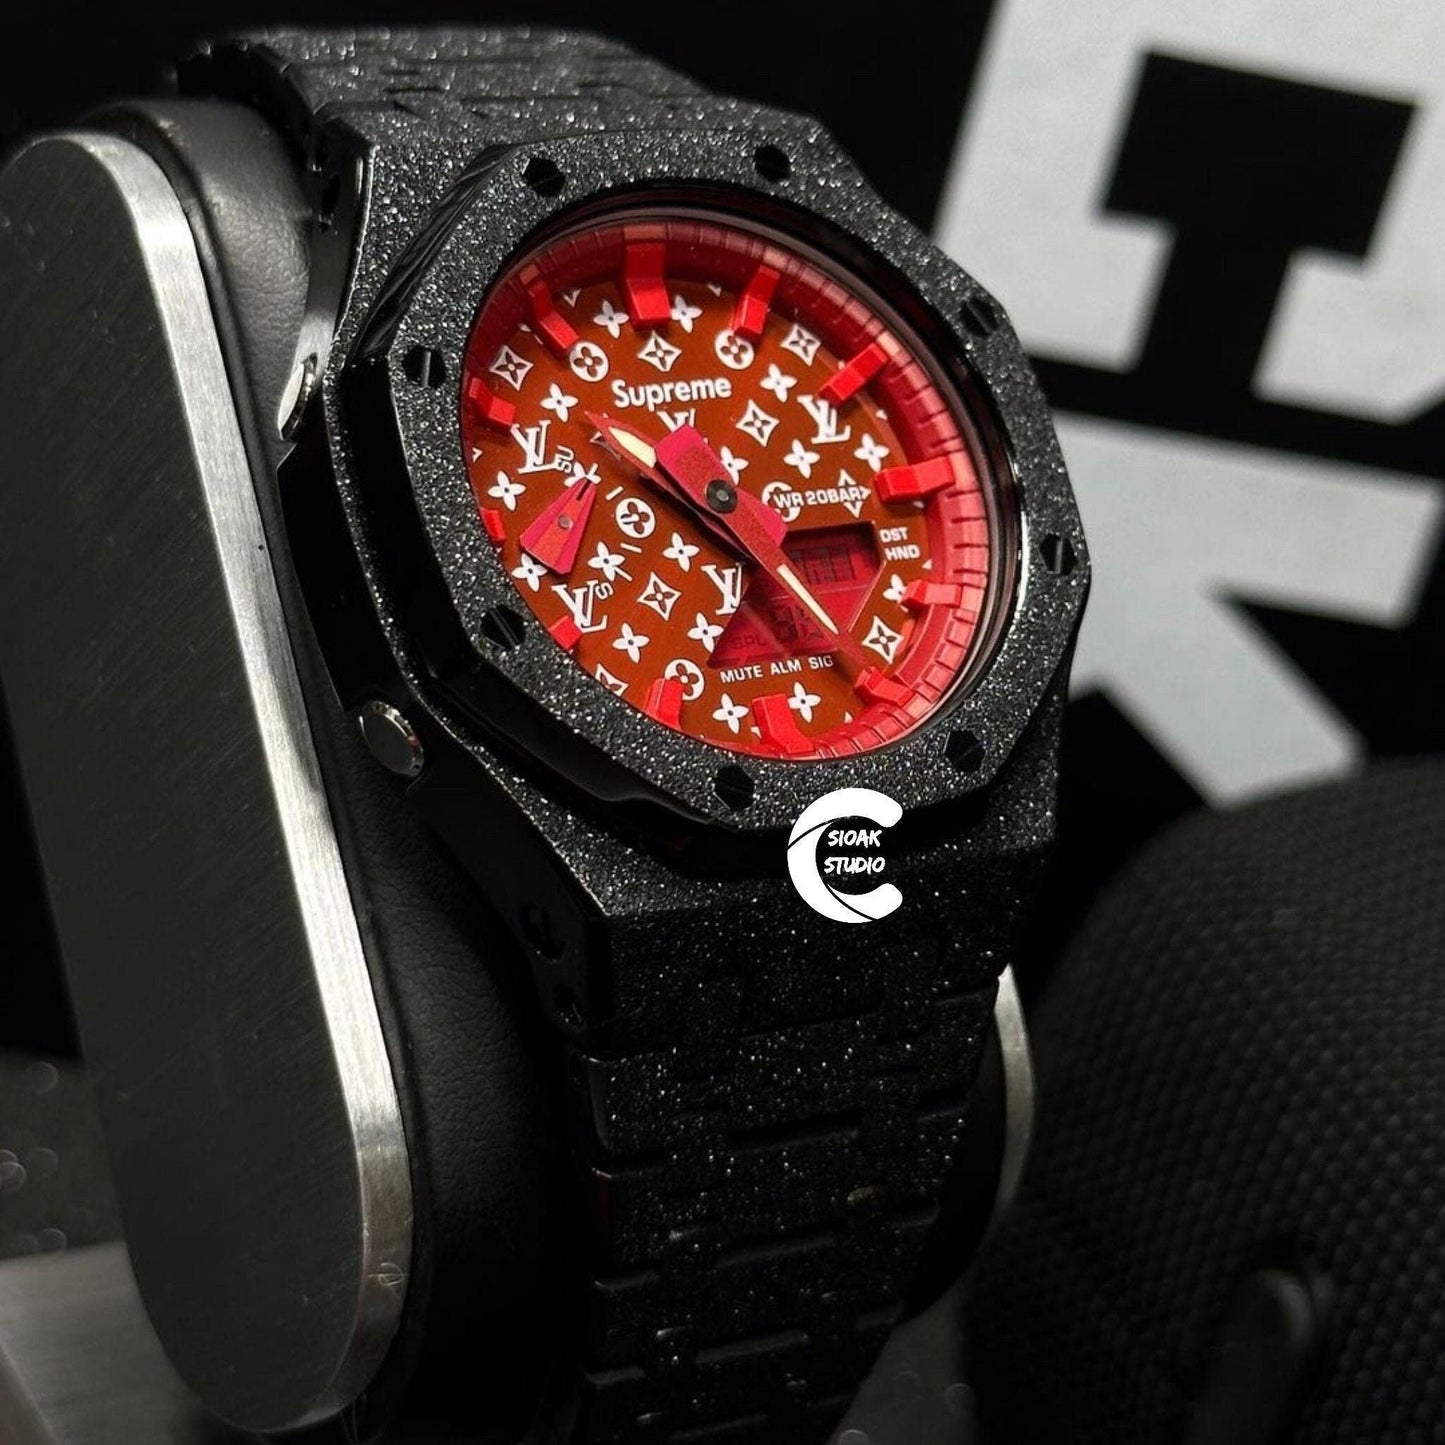 Casioak Mod Watch Frosted Black Case Metal Strap Red Time Mark Red Dial 44mm - Casioak Studio